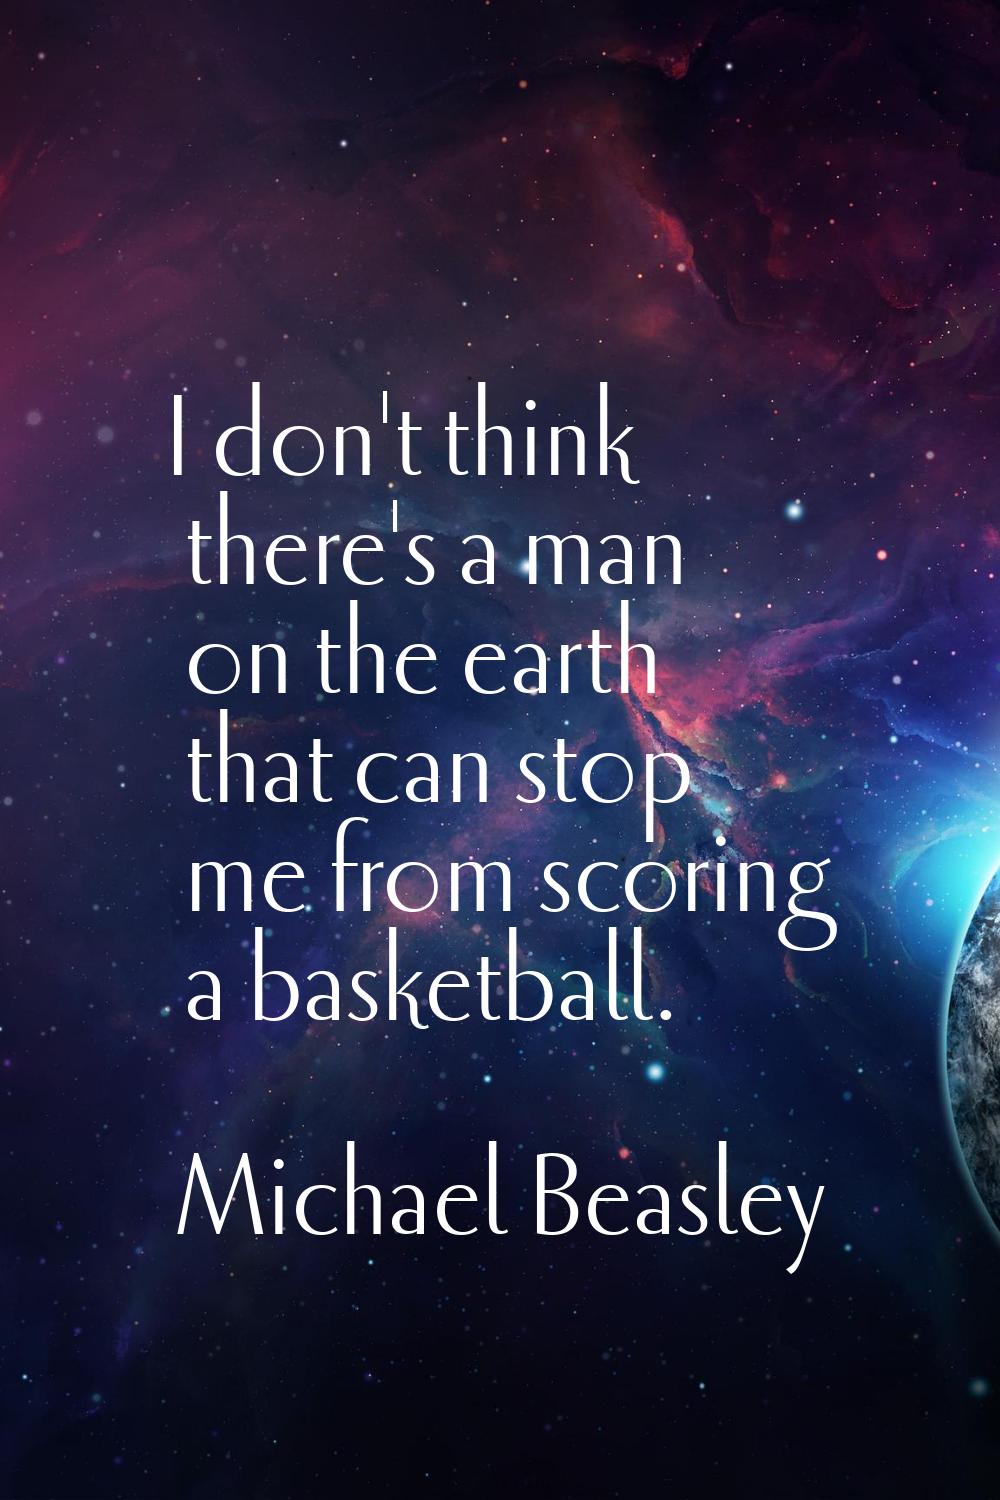 I don't think there's a man on the earth that can stop me from scoring a basketball.